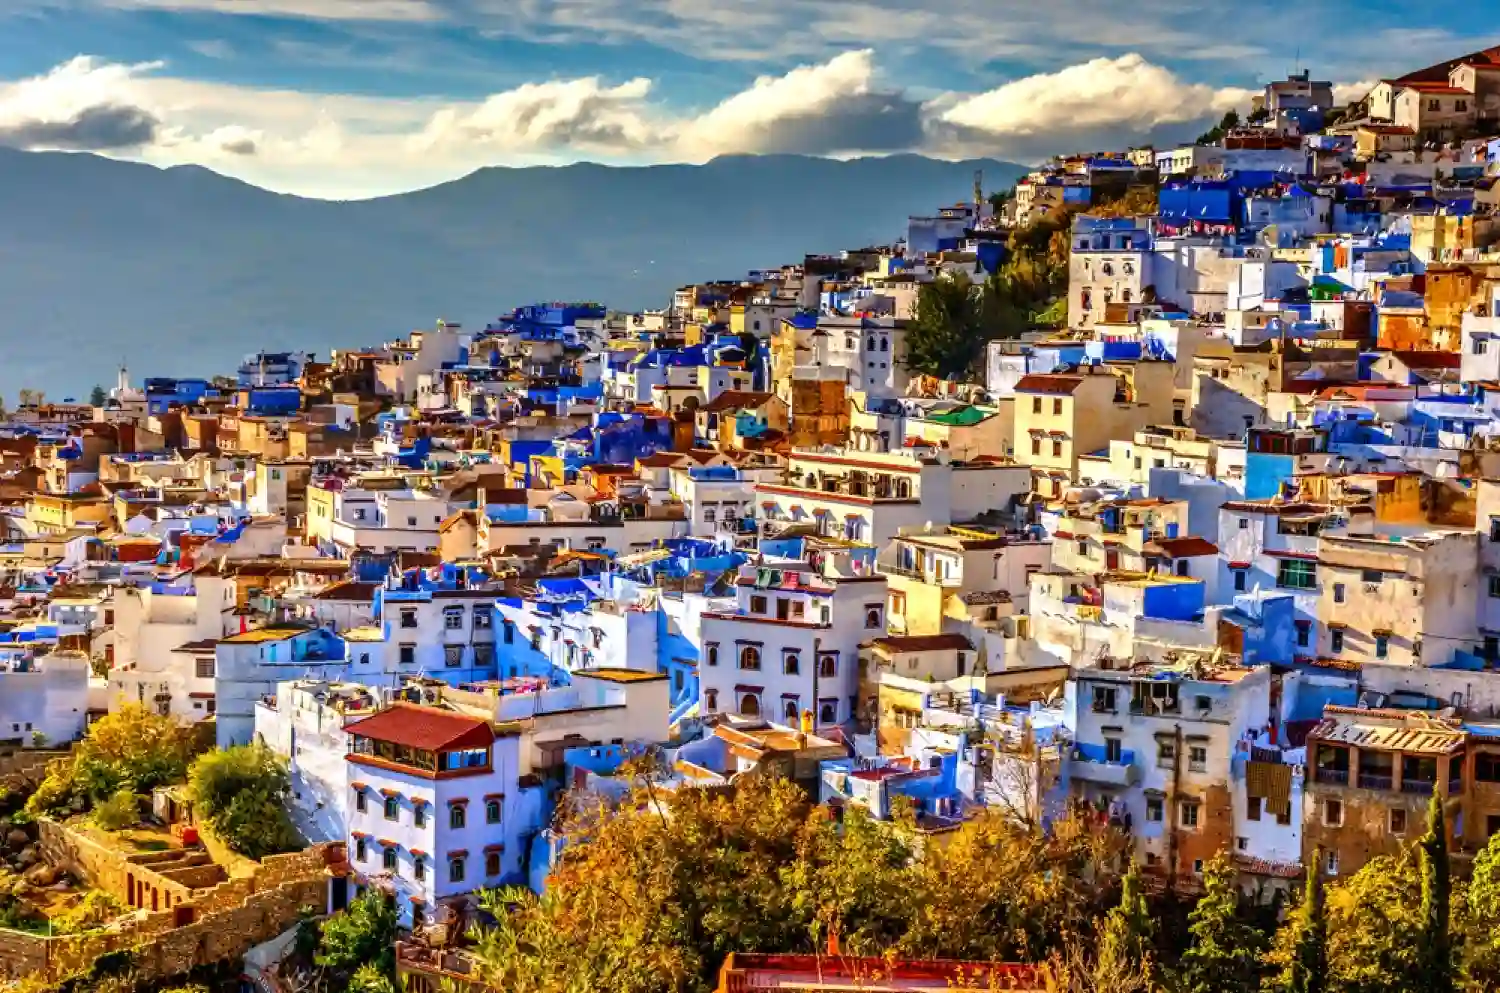 Day 3: Chefchaouen Sightseeing